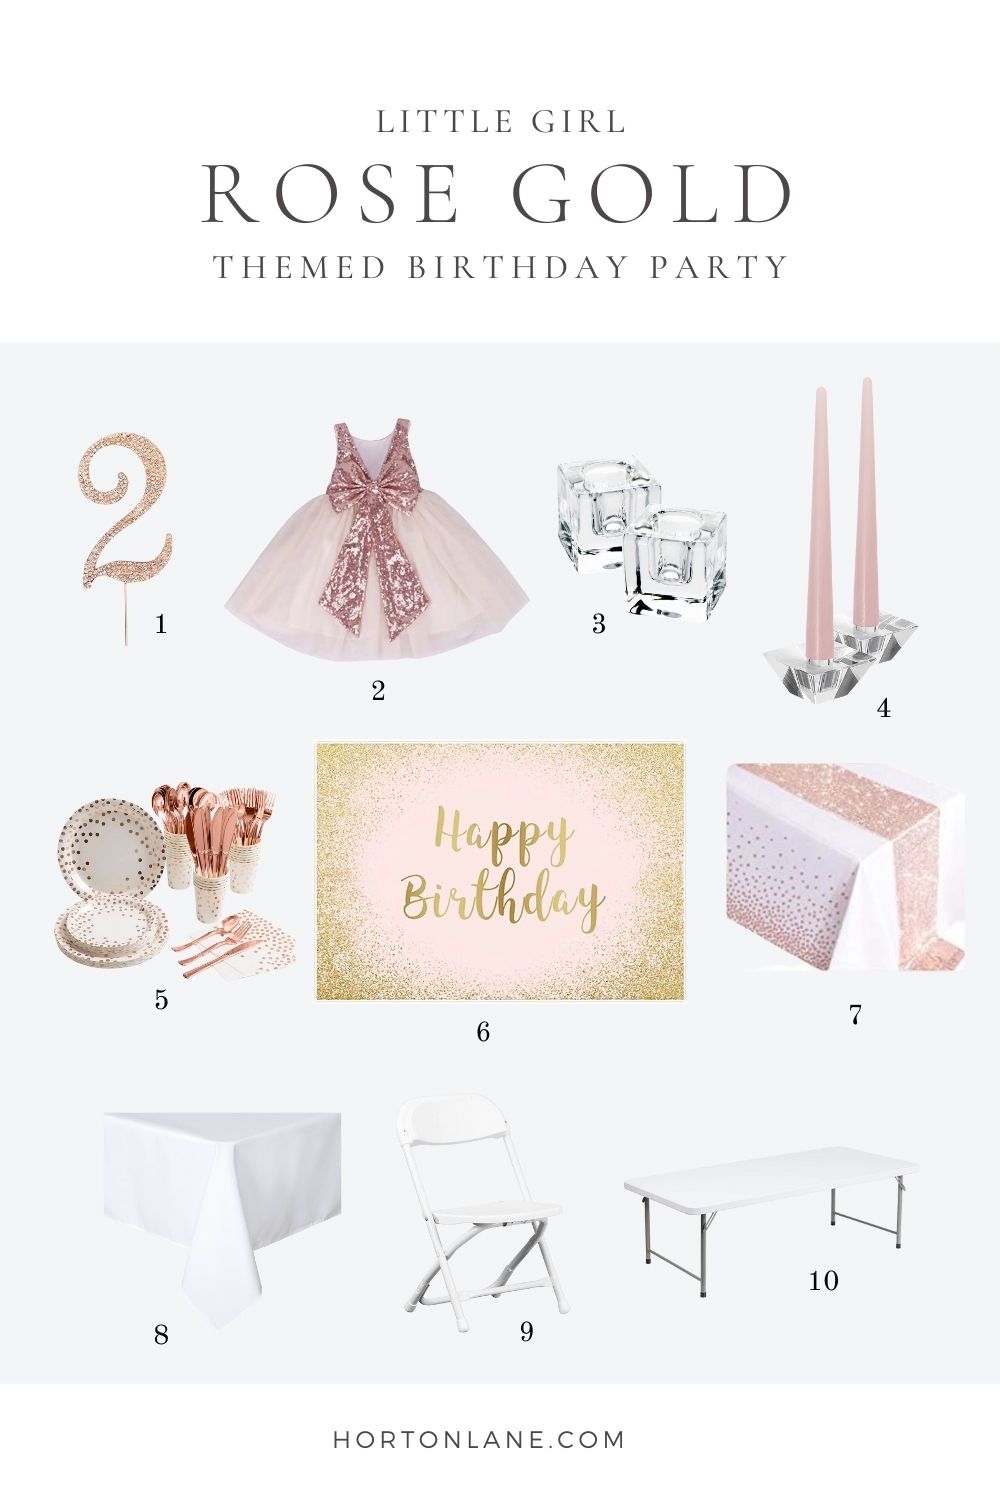 Pinterest Pin Collage-Little girl rose gold themed birthday party two years old pink party